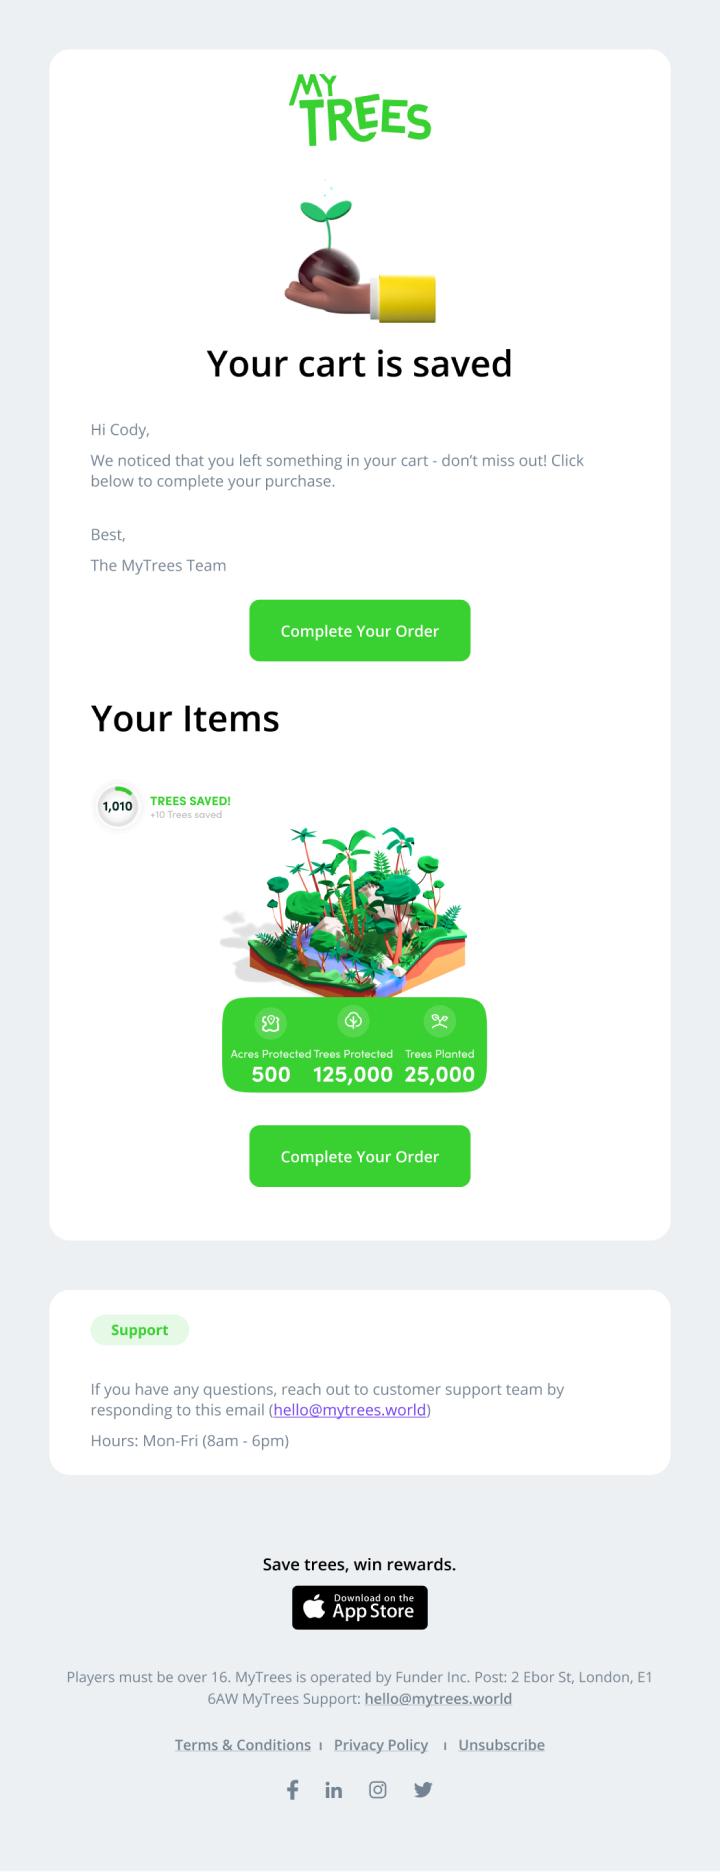 Design for MyTrees